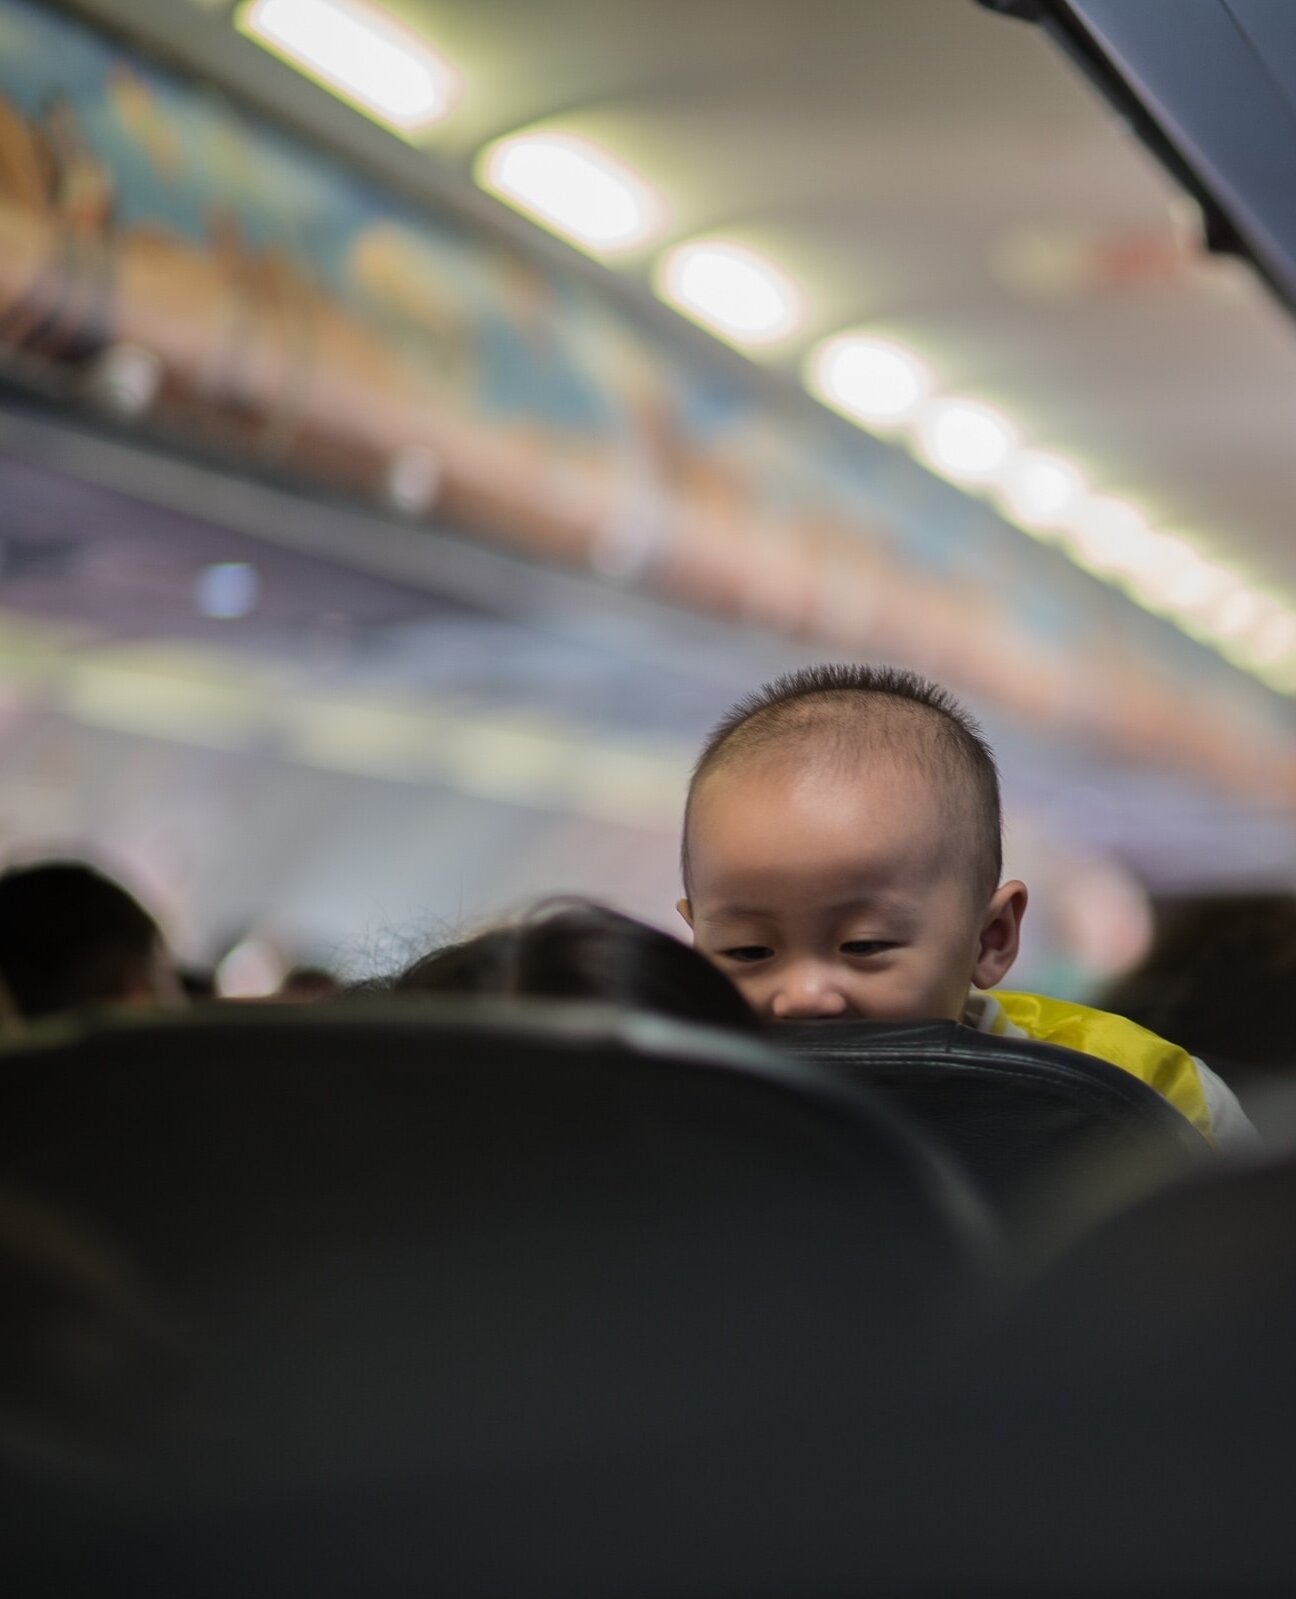 🙂Did you see the viral video last week of a man on a plane screaming about a baby screaming?⁠
⁠
Thoughts?⁠
⁠
I get the frustration, but also it's a baby. And there's likely no one who wants the baby to stop screaming more than the child's parents.⁠
